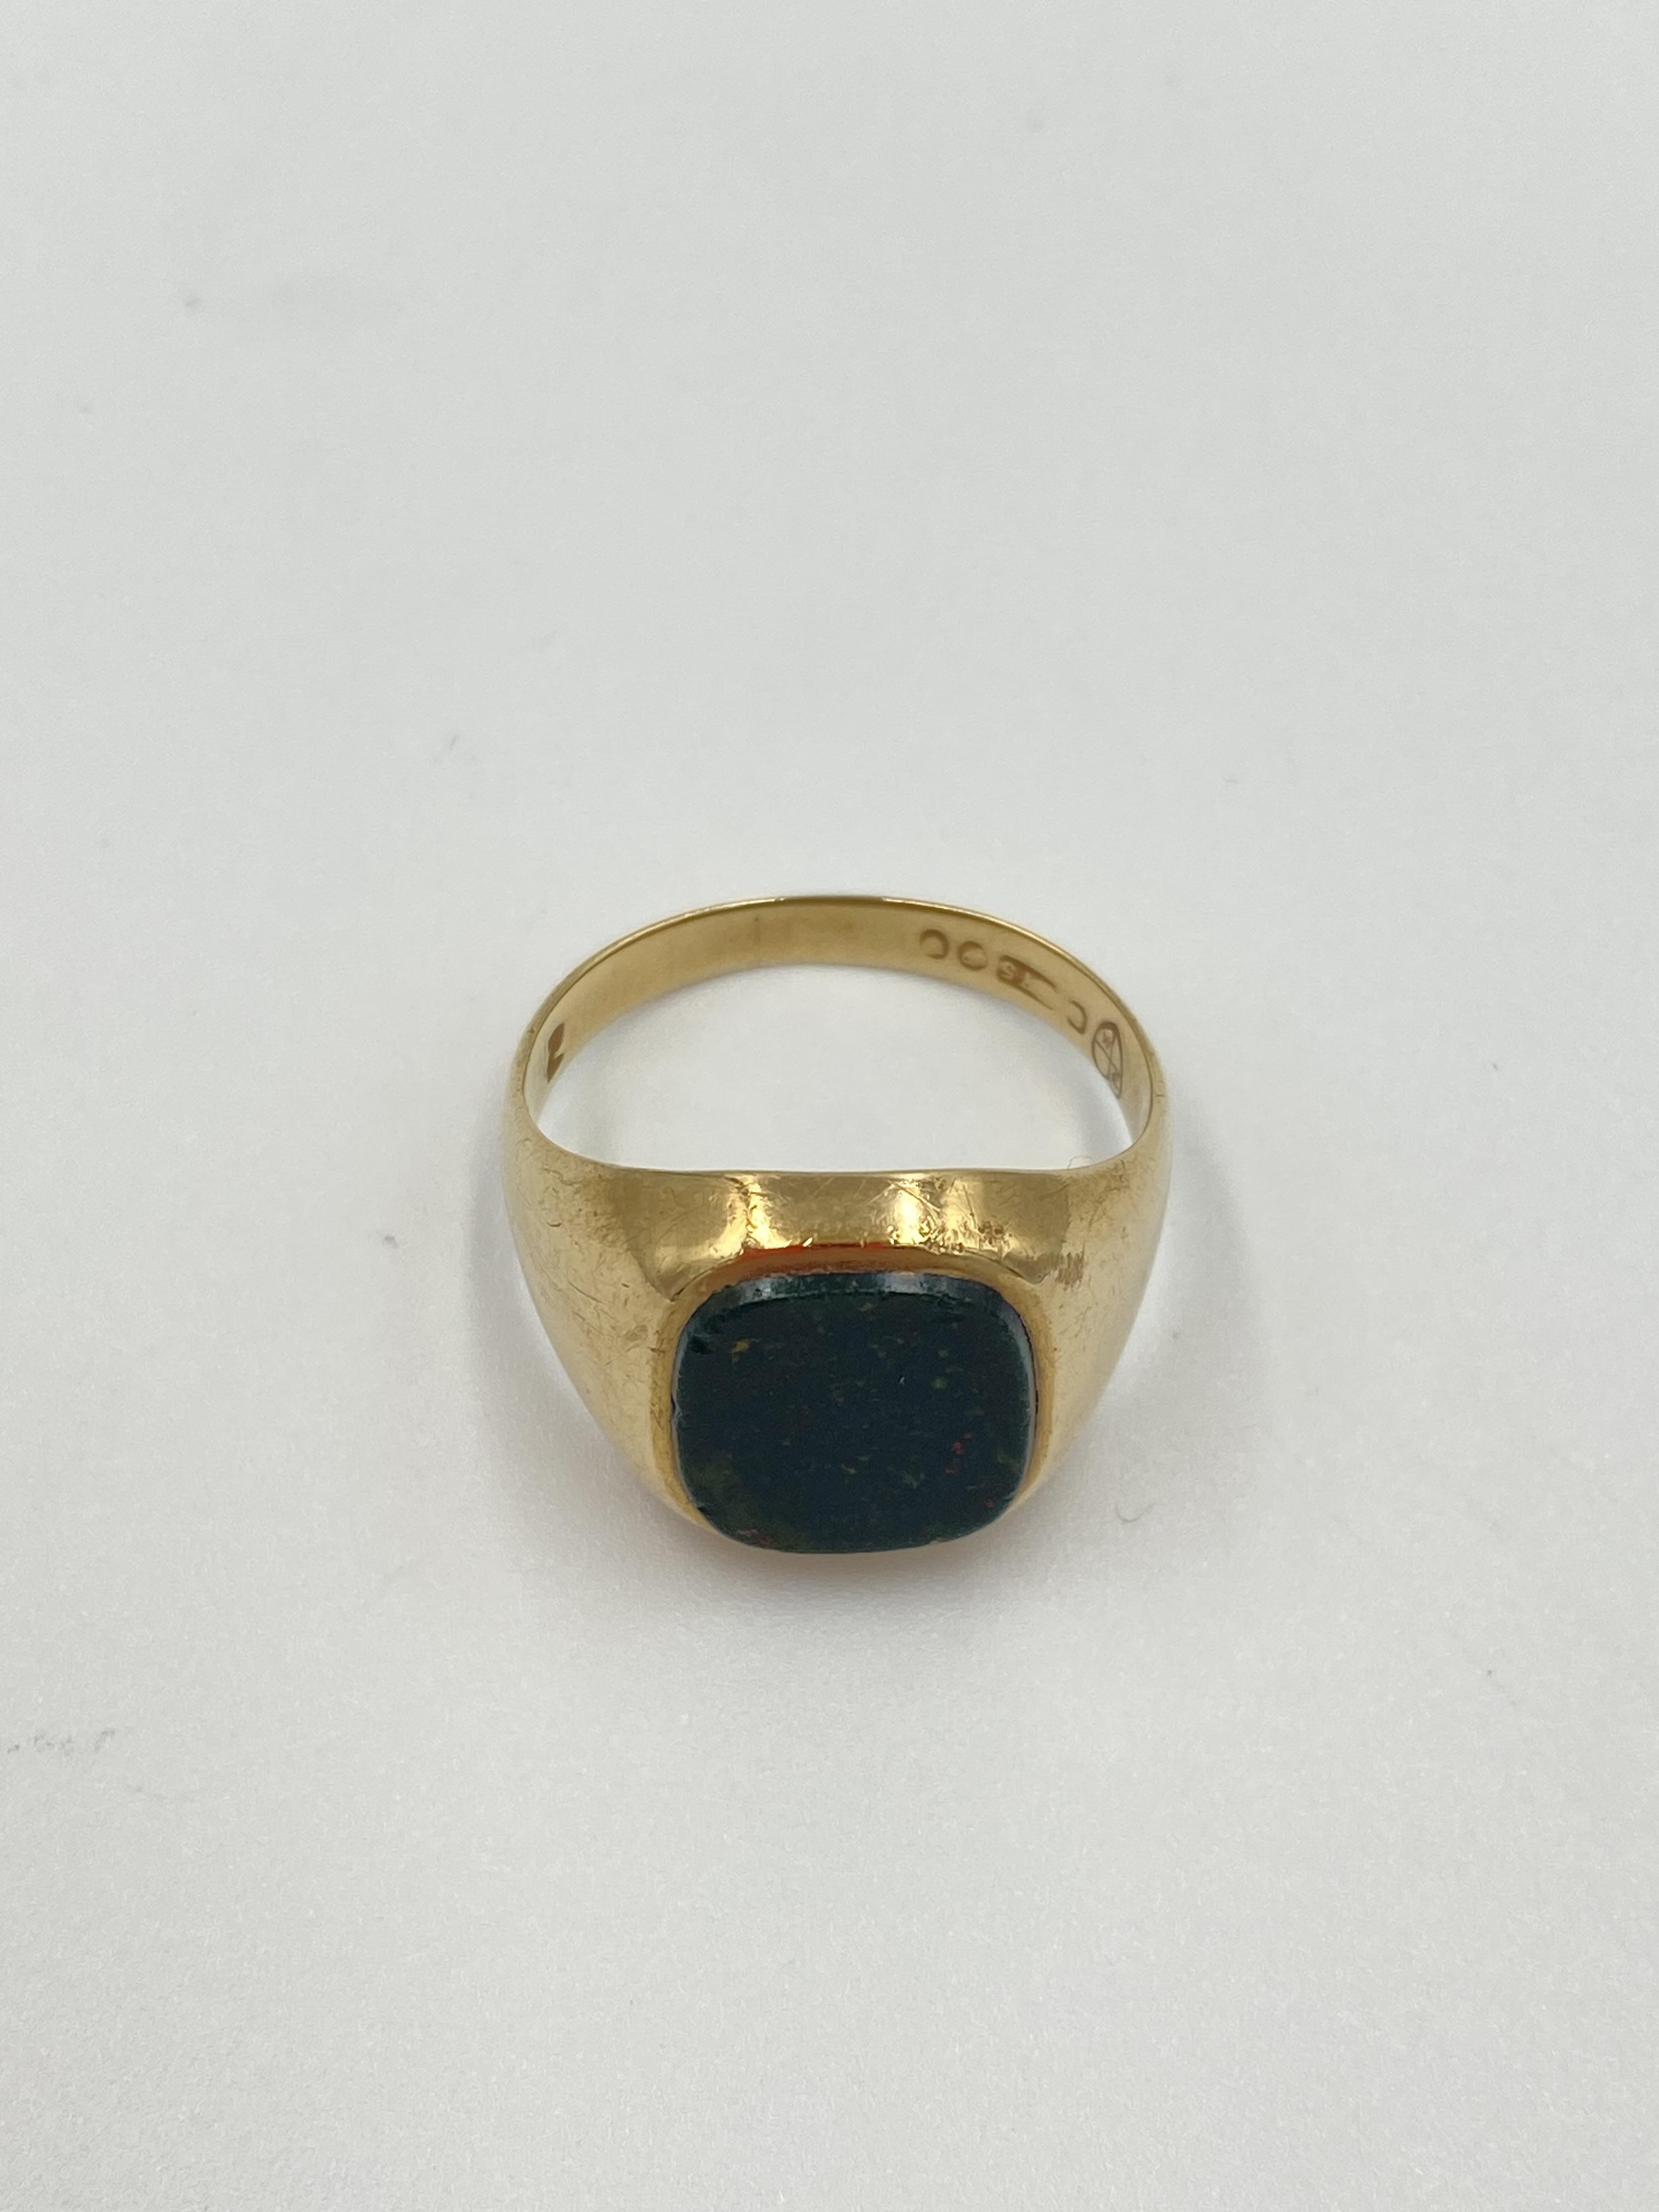 9ct gold and agate ring - Image 2 of 5